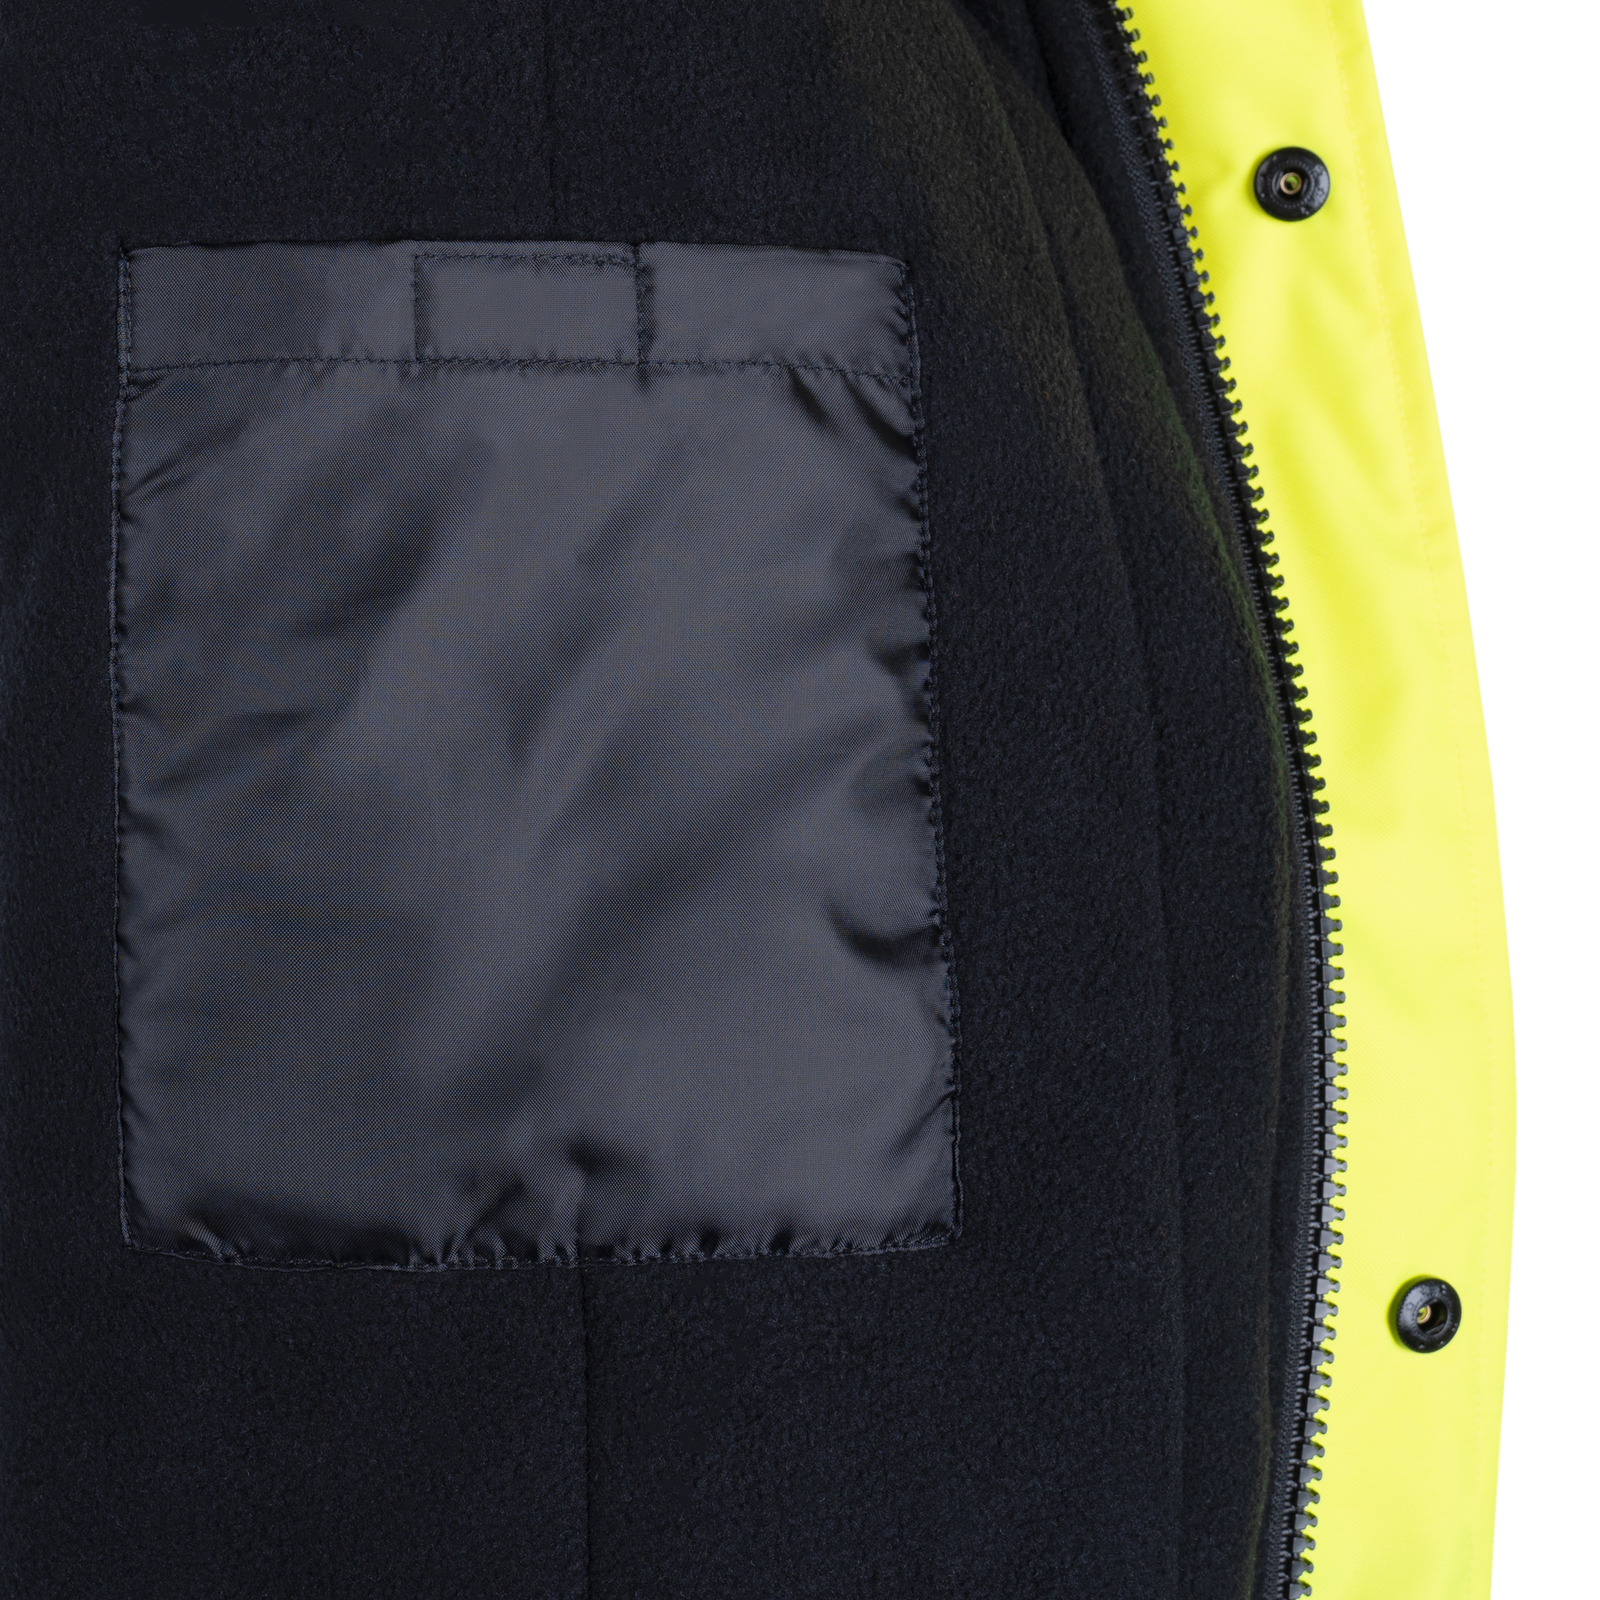 View yellow and black Hi-vis safety jacket with fleece liner, heat transfer reflective tapes, removable hoodie and pockets. 